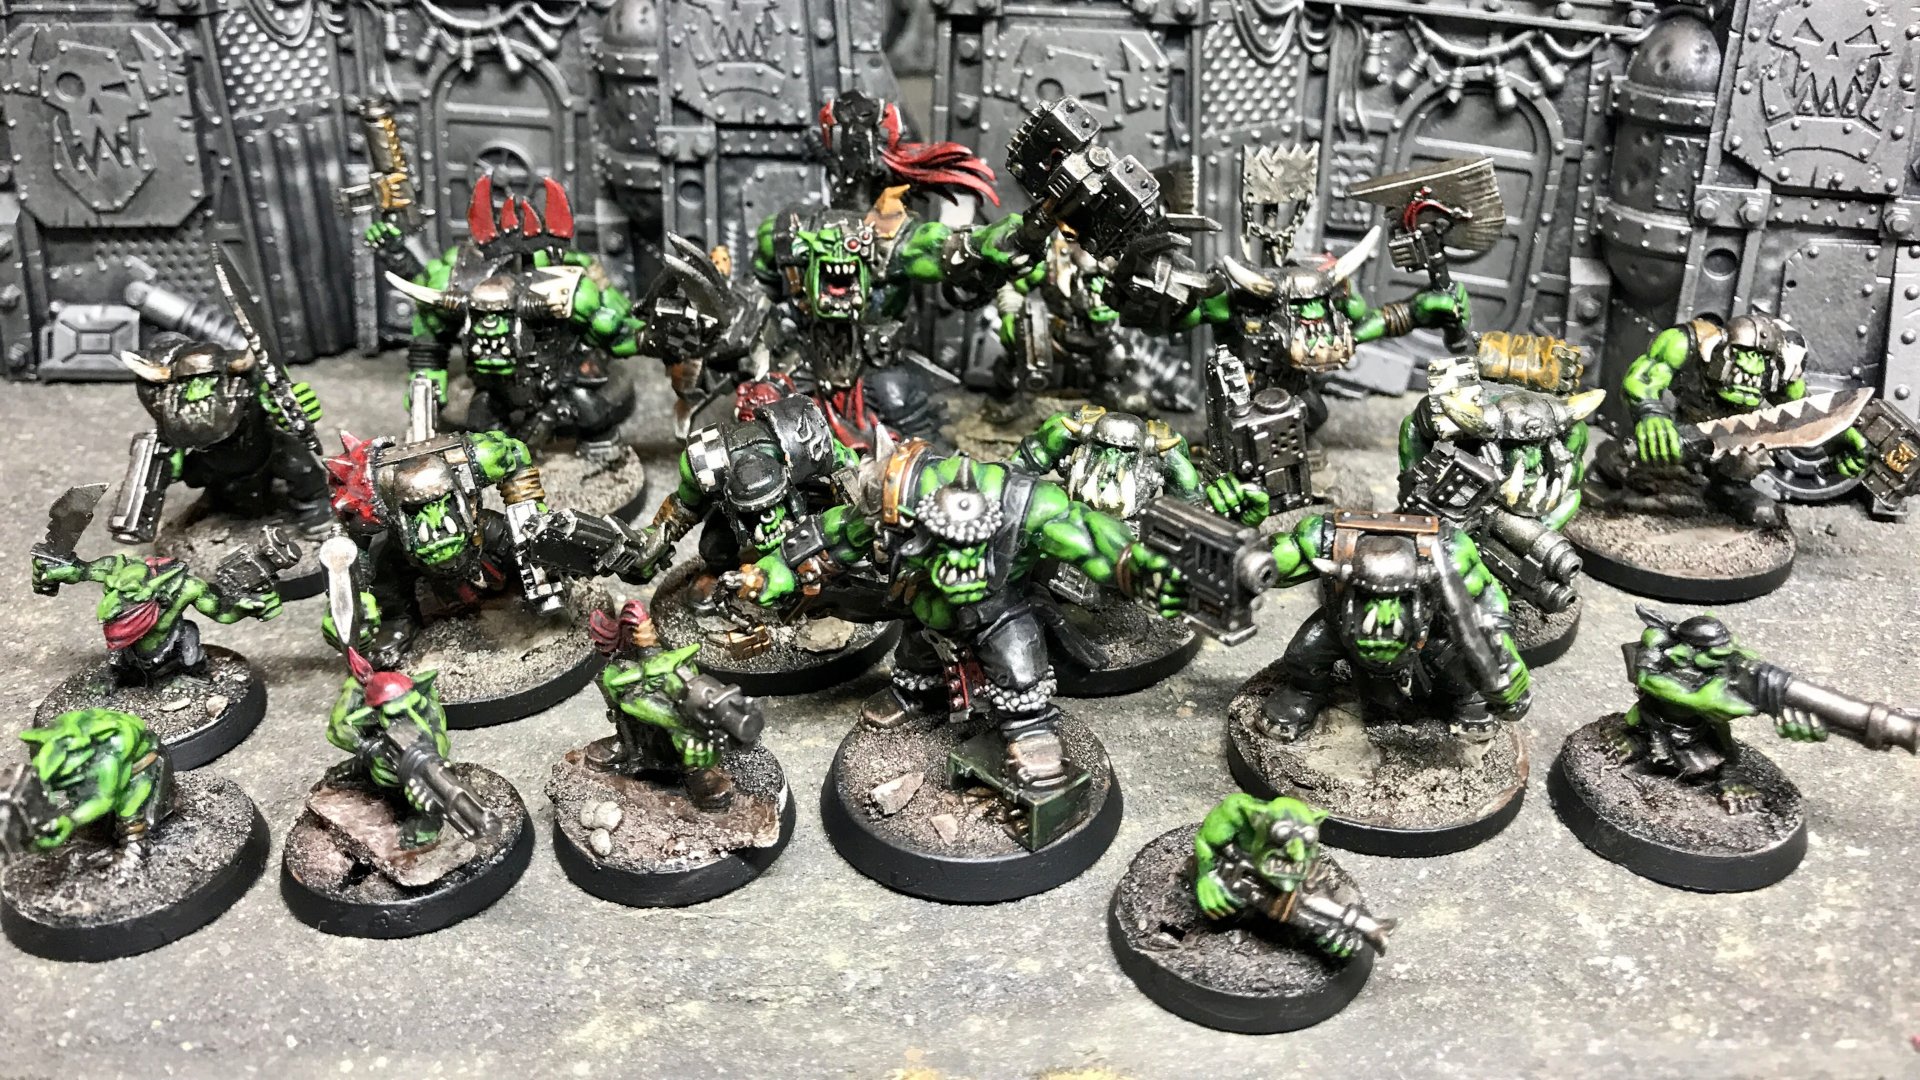 Warhammer 40k orks army guide - photo from Chris James showing Ork Boyz models